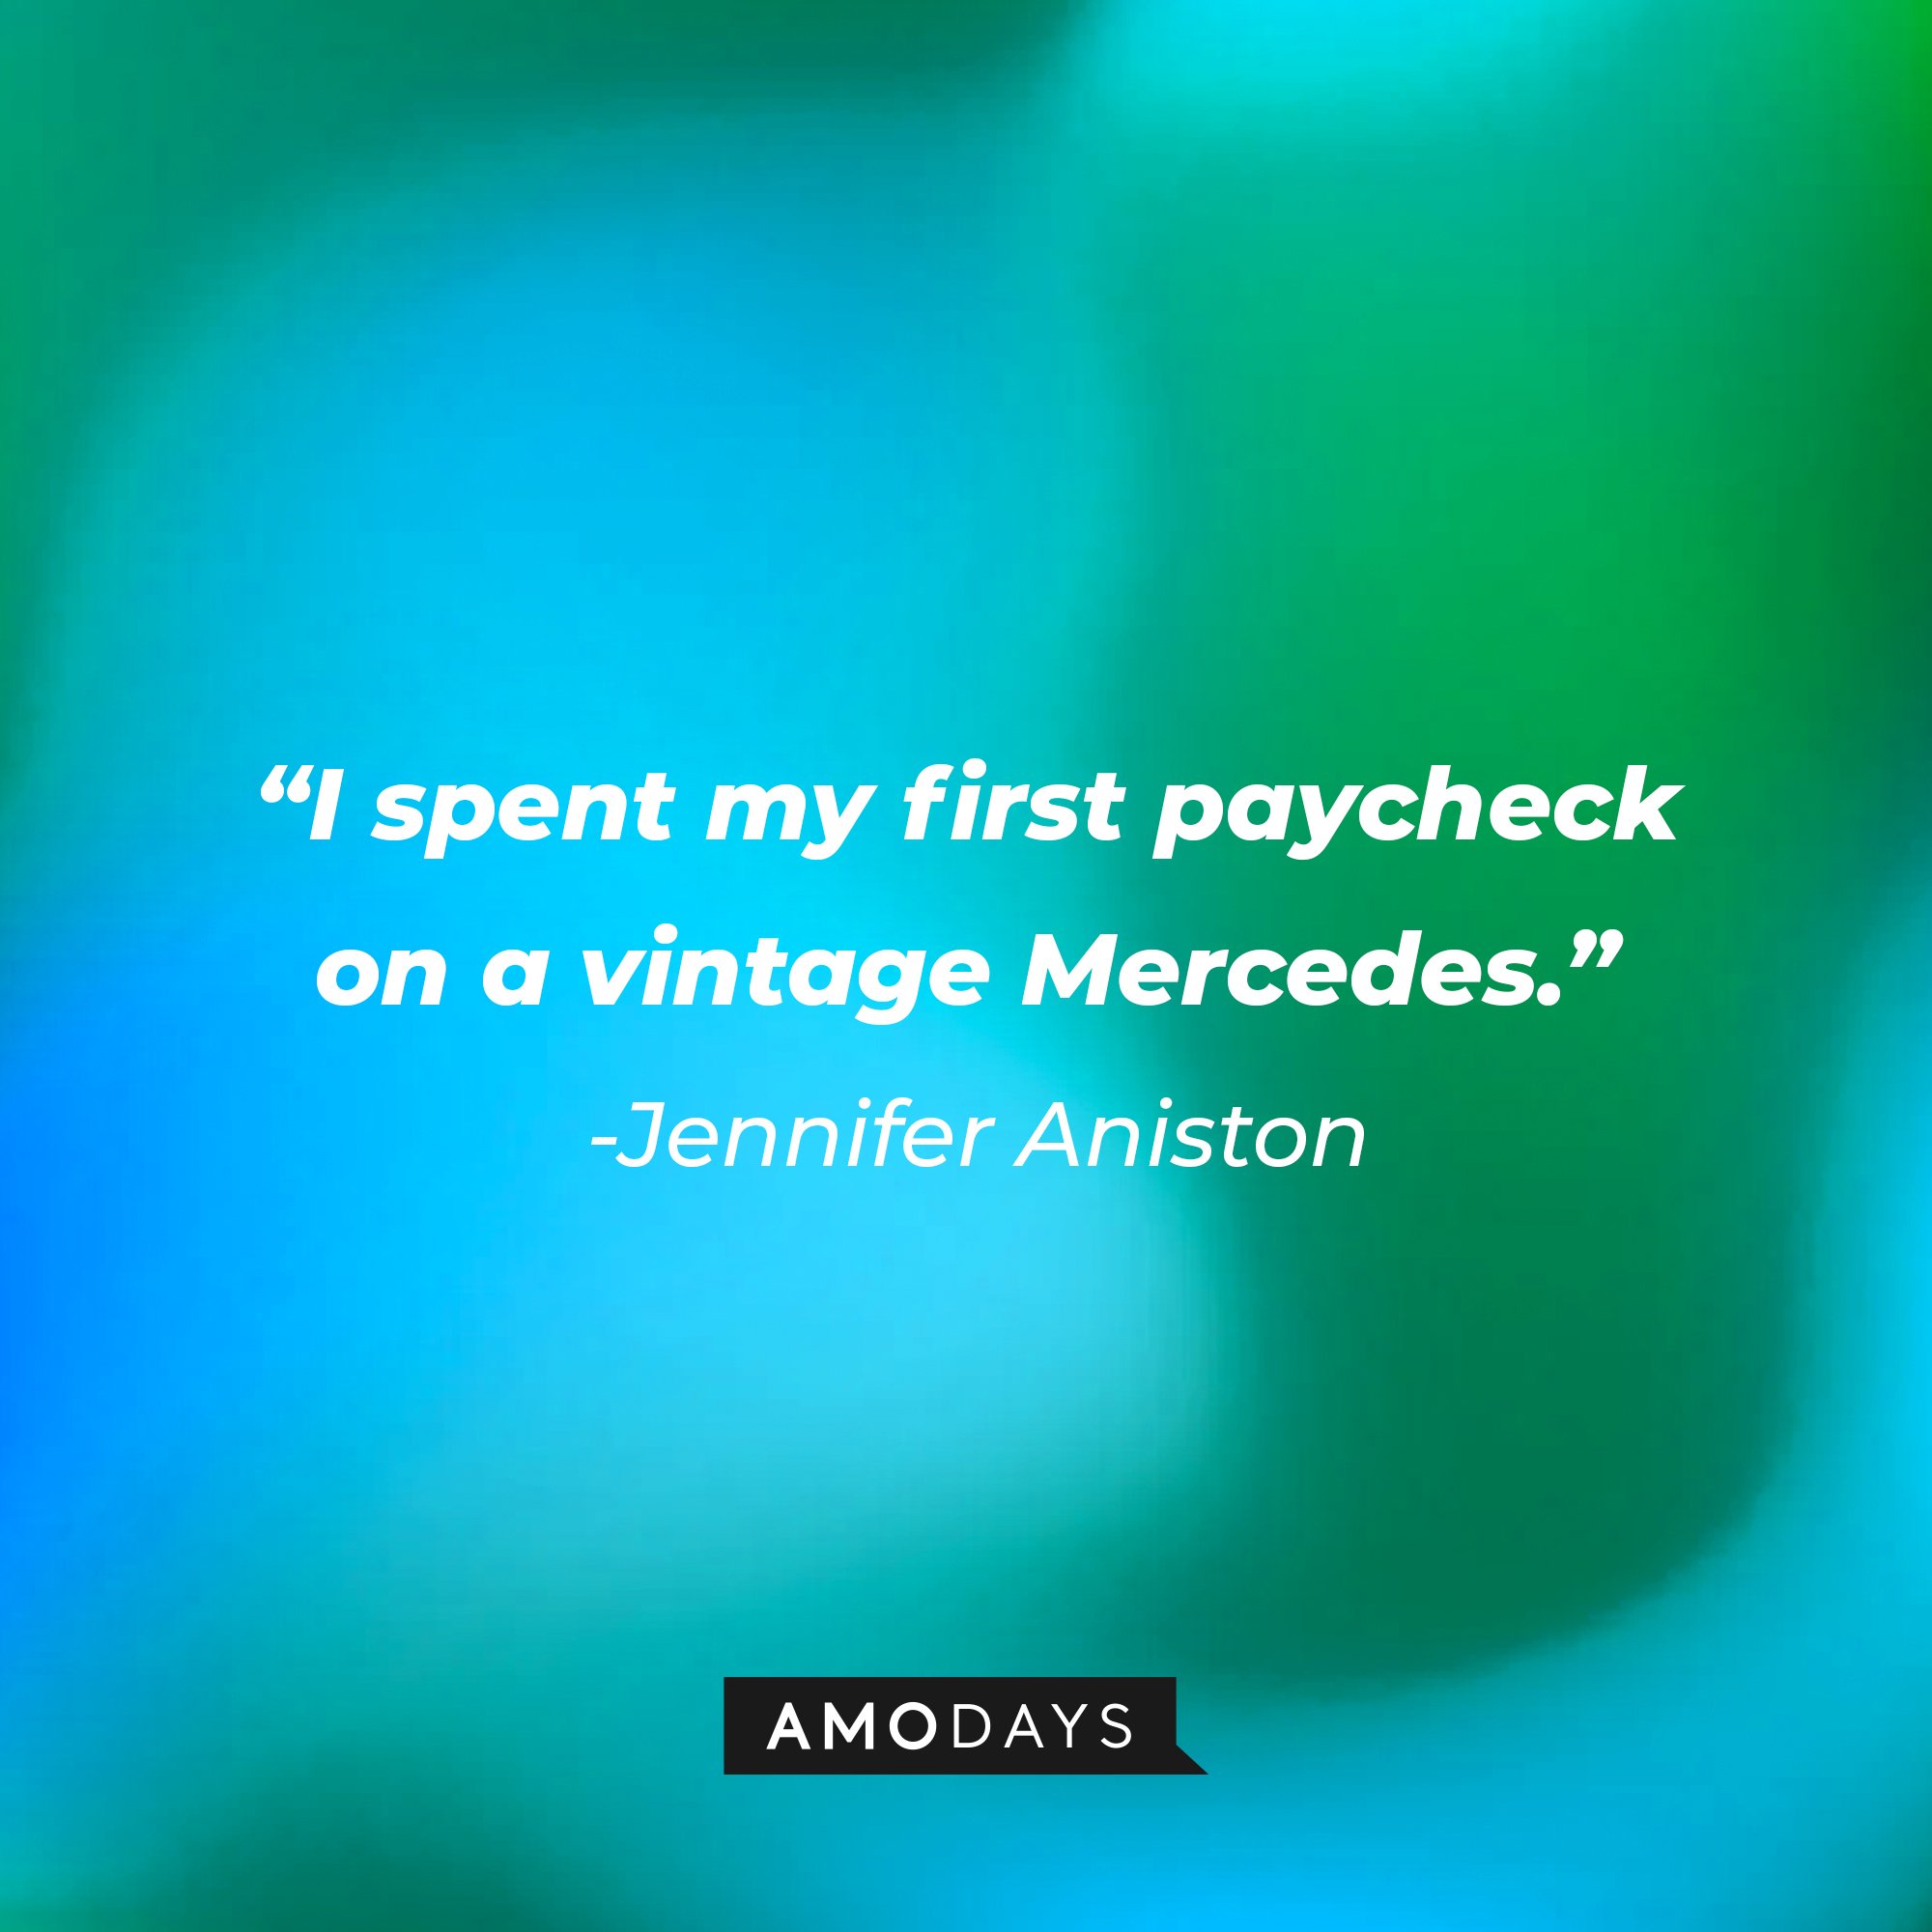  Jennifer Aniston’s quote: "I spent my first paycheck on a vintage Mercedes." | Image: AmoDays